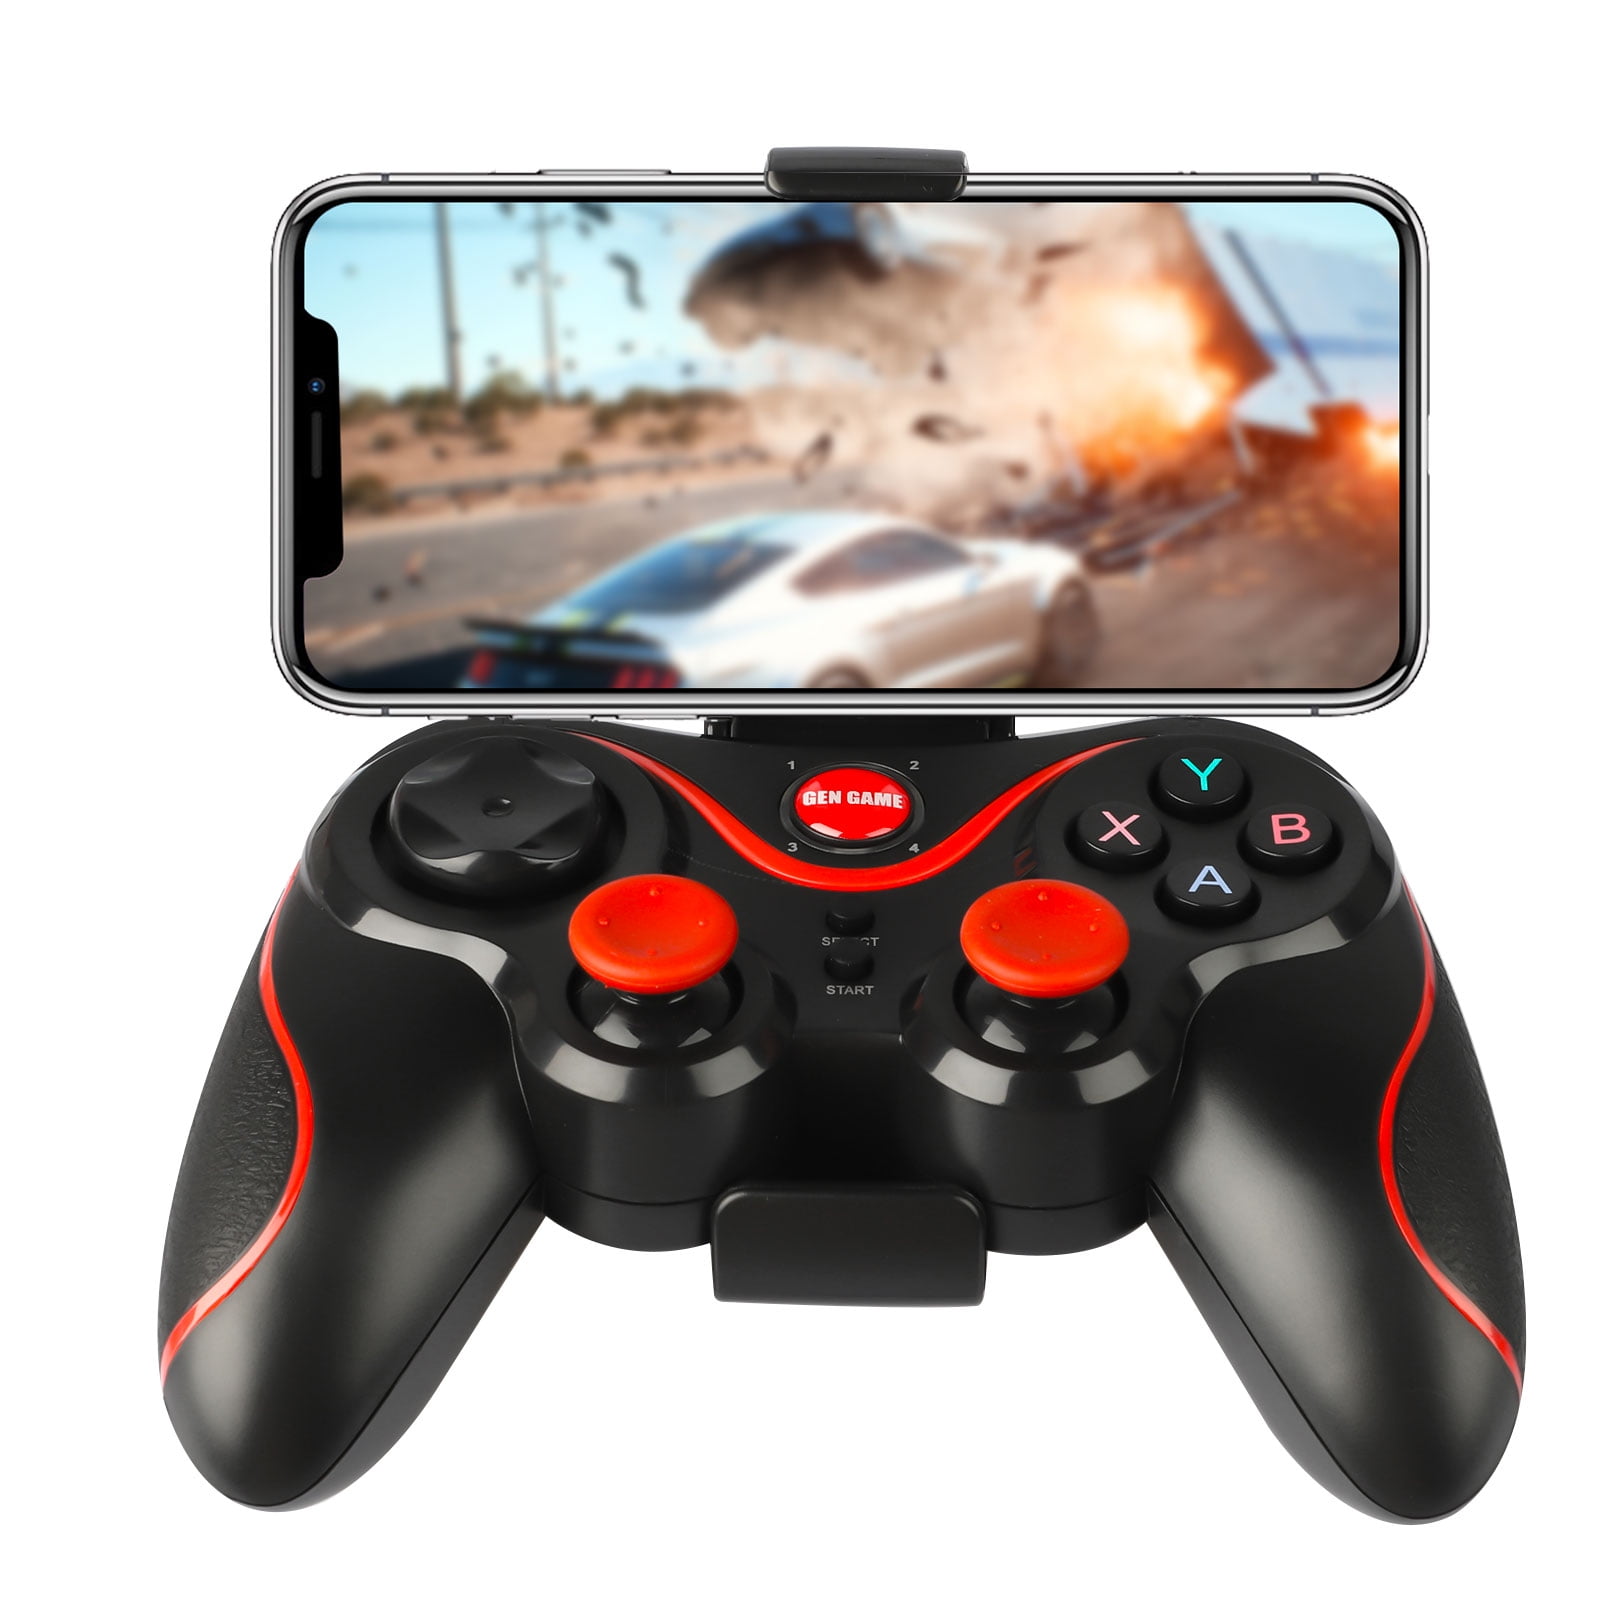 Mobile Game Controller, EEEkit Wireless Gaming Controller 4.0 Gamepad Compatible with iOS Android iPhone iPad Samsung Galaxy - Walmart.com